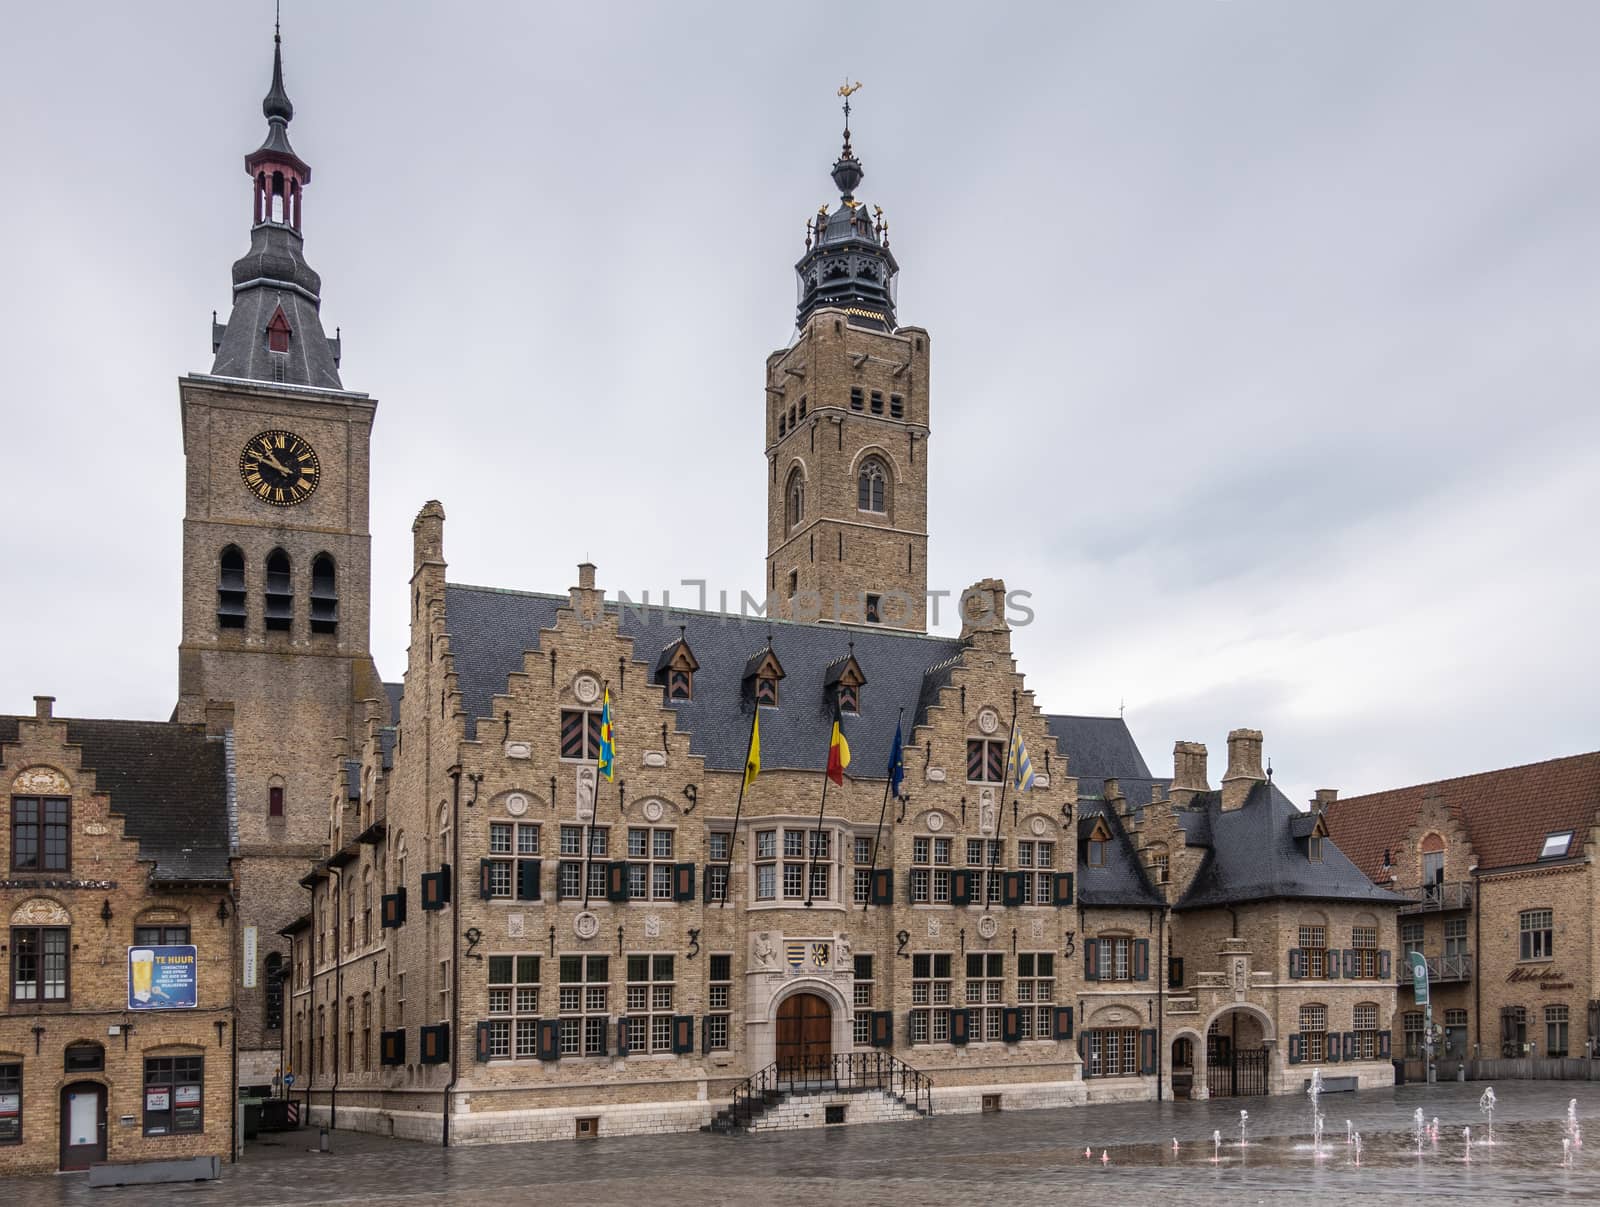 Stadhuis or City Hall and church tower of Diksmuide, Flanders, B by Claudine